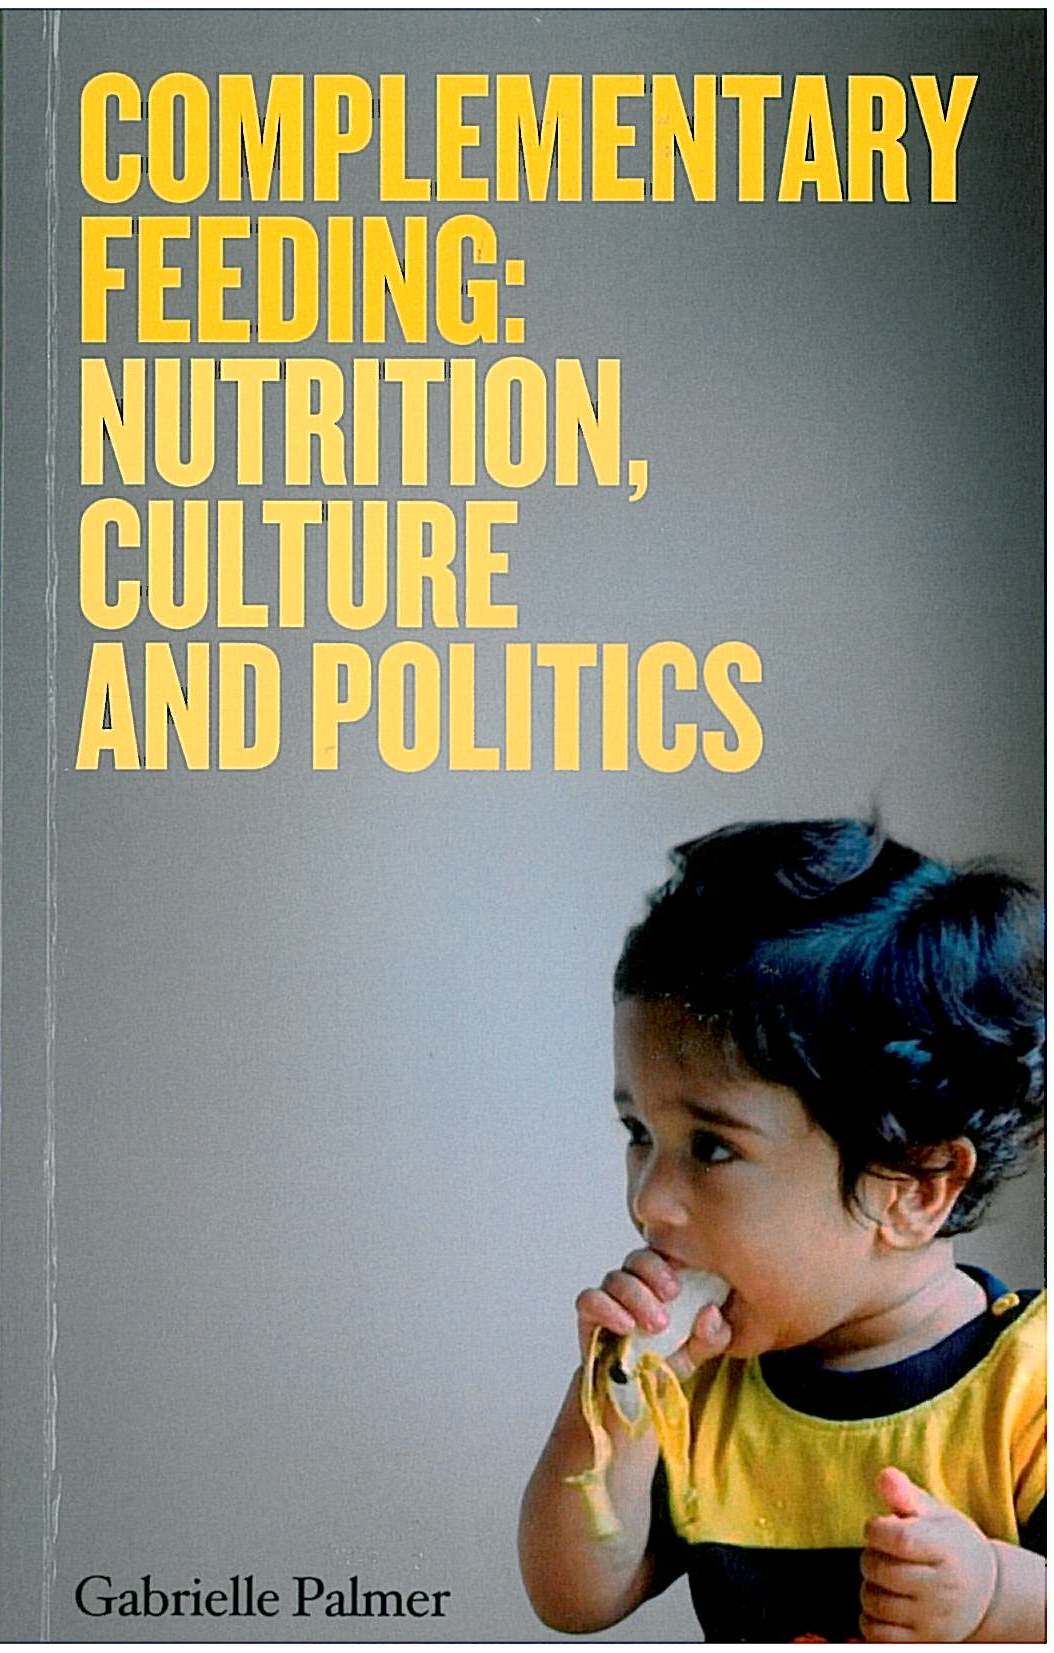 You are currently viewing Complementary Feeding: Nutrition, Culture and Politics